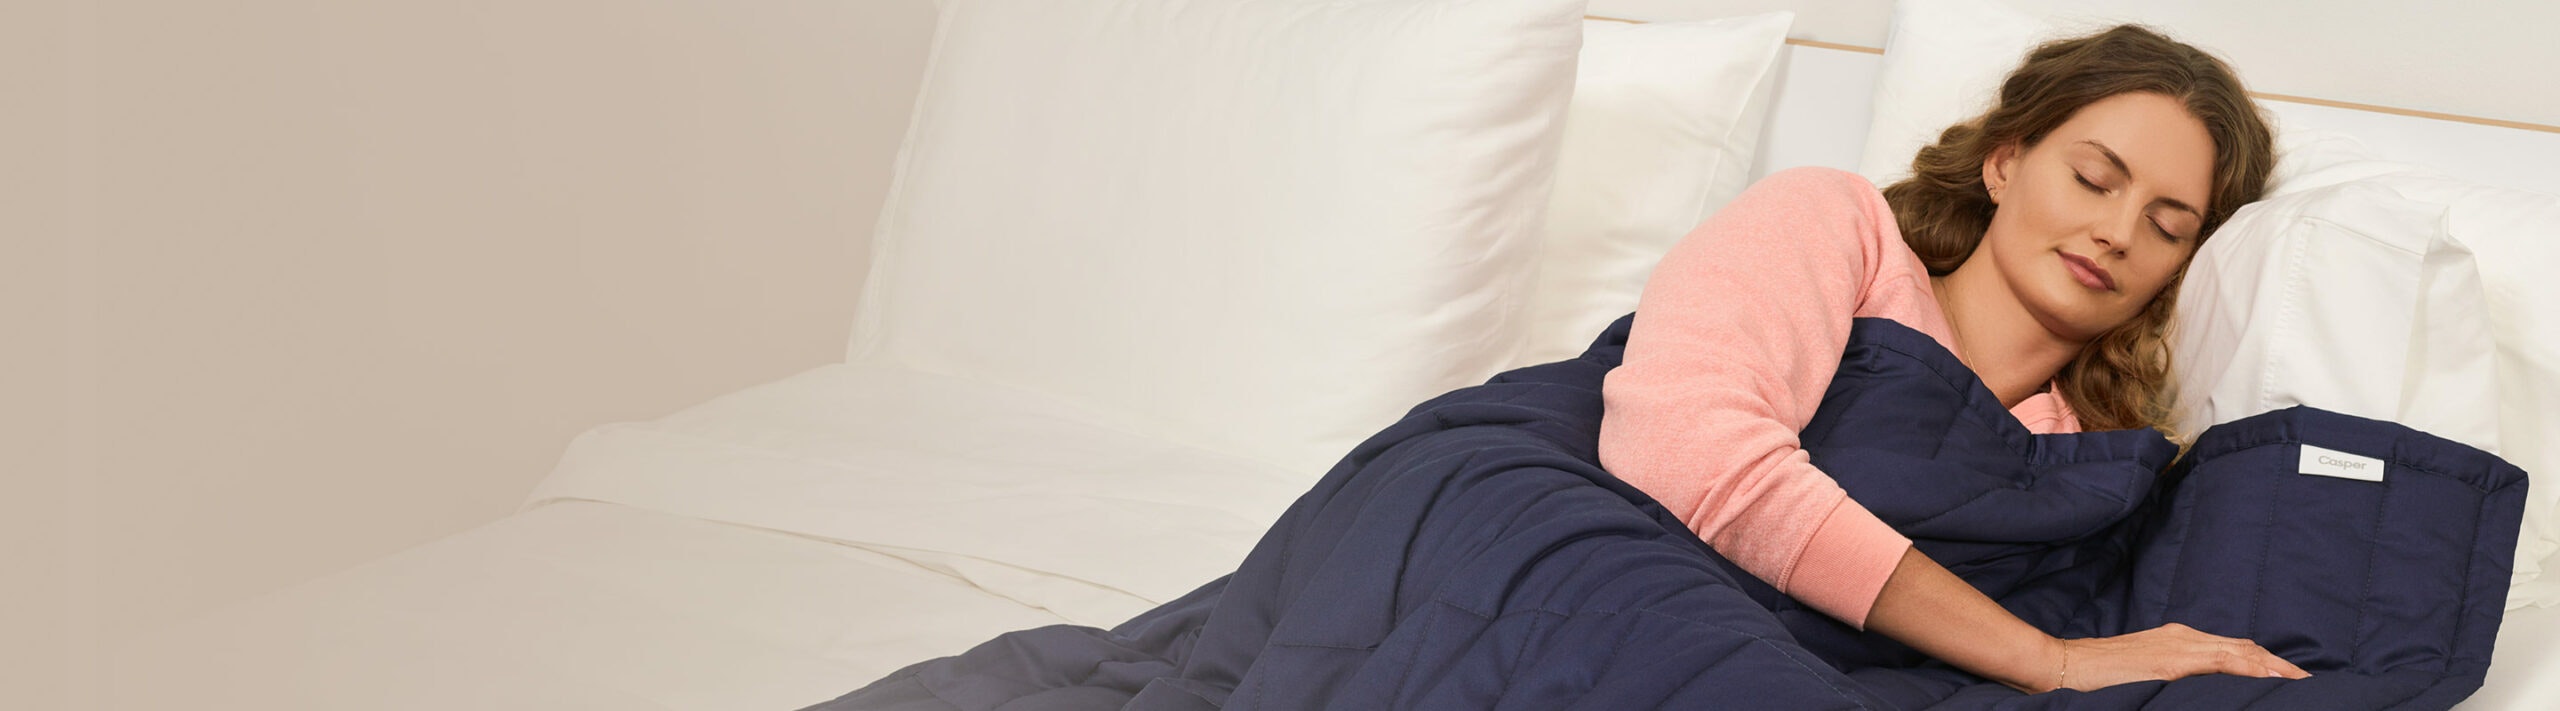 How to Choose a Weighted Blanket: 5 Questions to Ask | Casper Blog